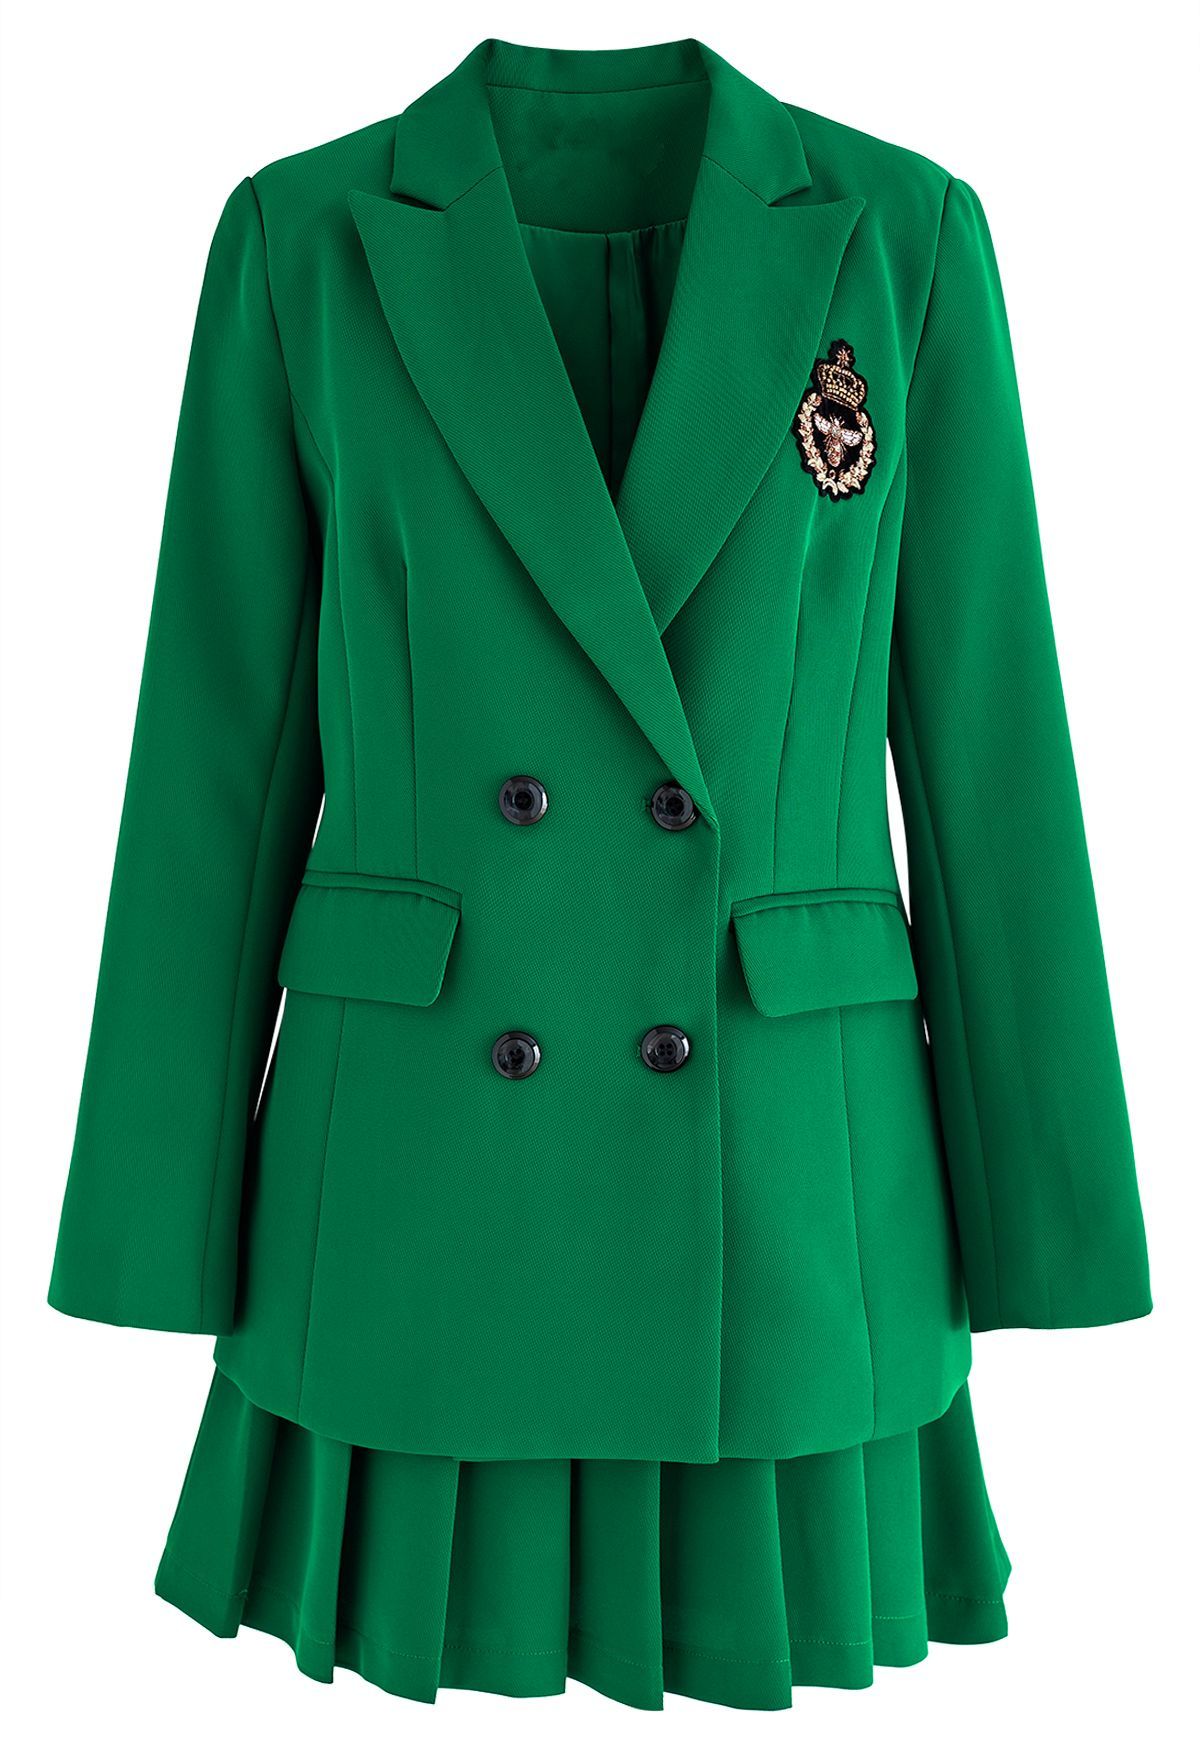 Bee Badge Solid Color Blazer and Skirt Set in Green | Chicwish